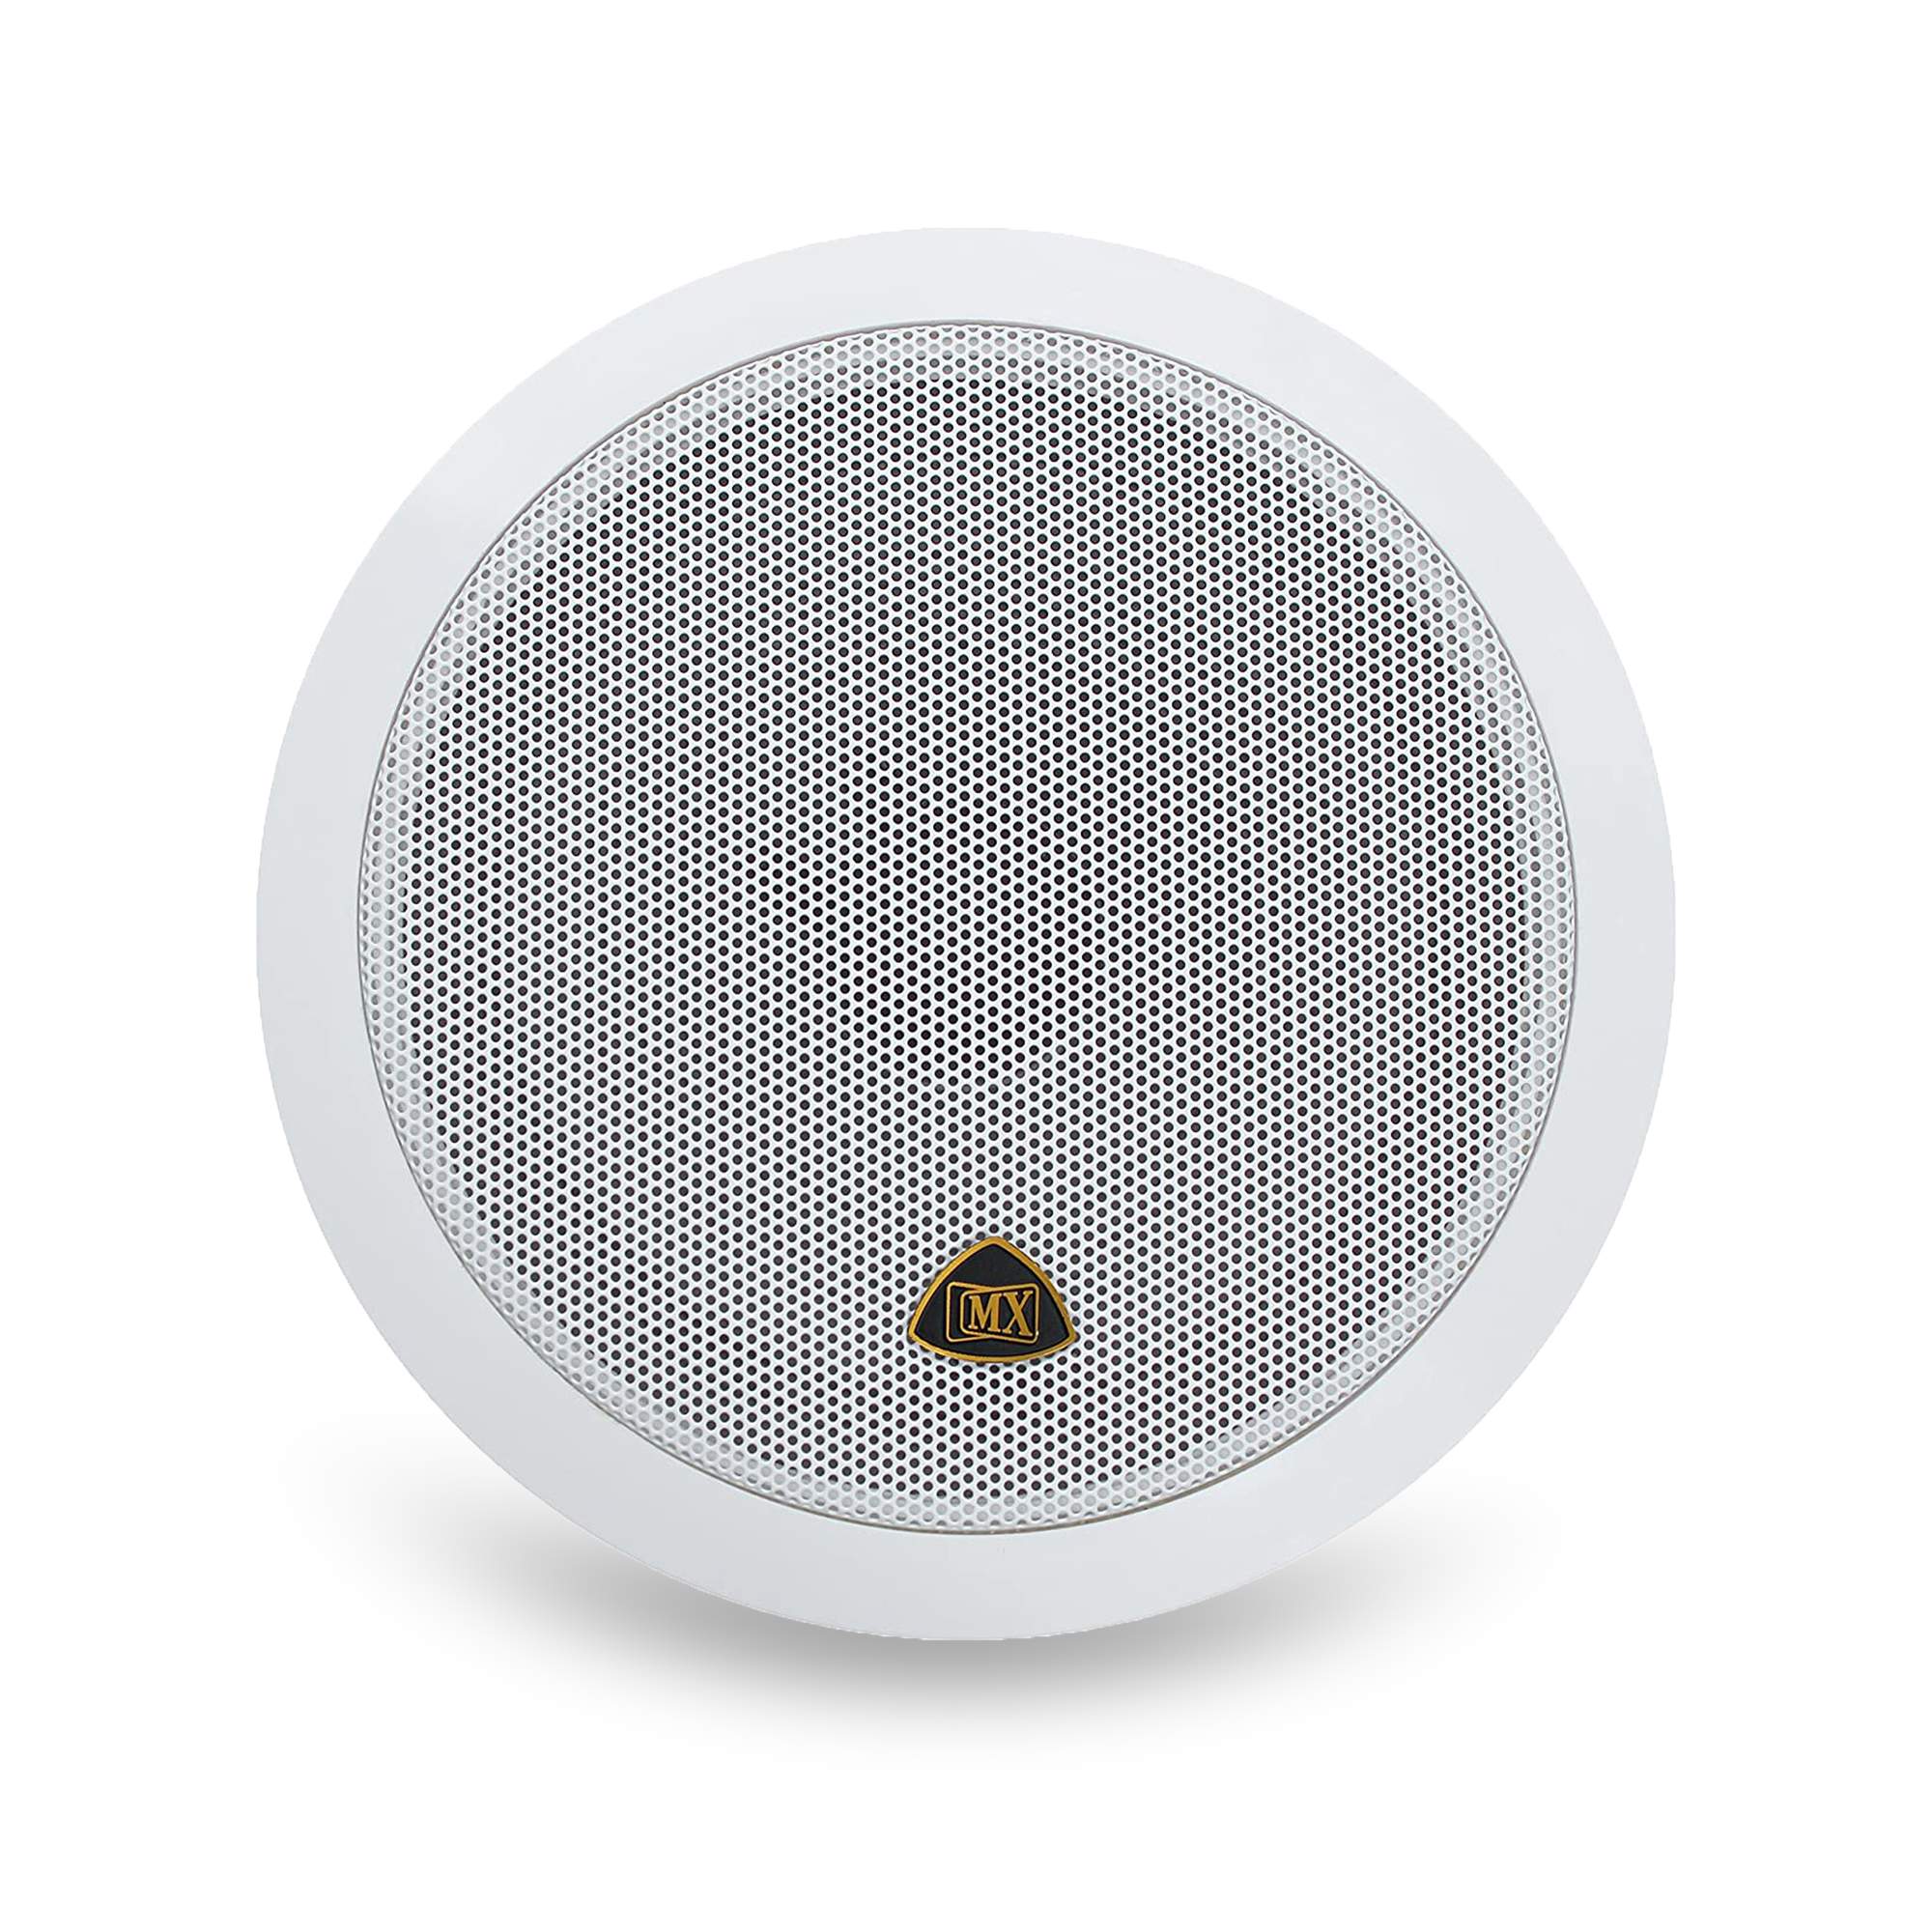 Mx 6 5 Inch Weather Proof 2 Way In Ceiling Wall Stereo Speakers 3726 Home Audio Speaker White Mono Channel Mdr Technologies Limited